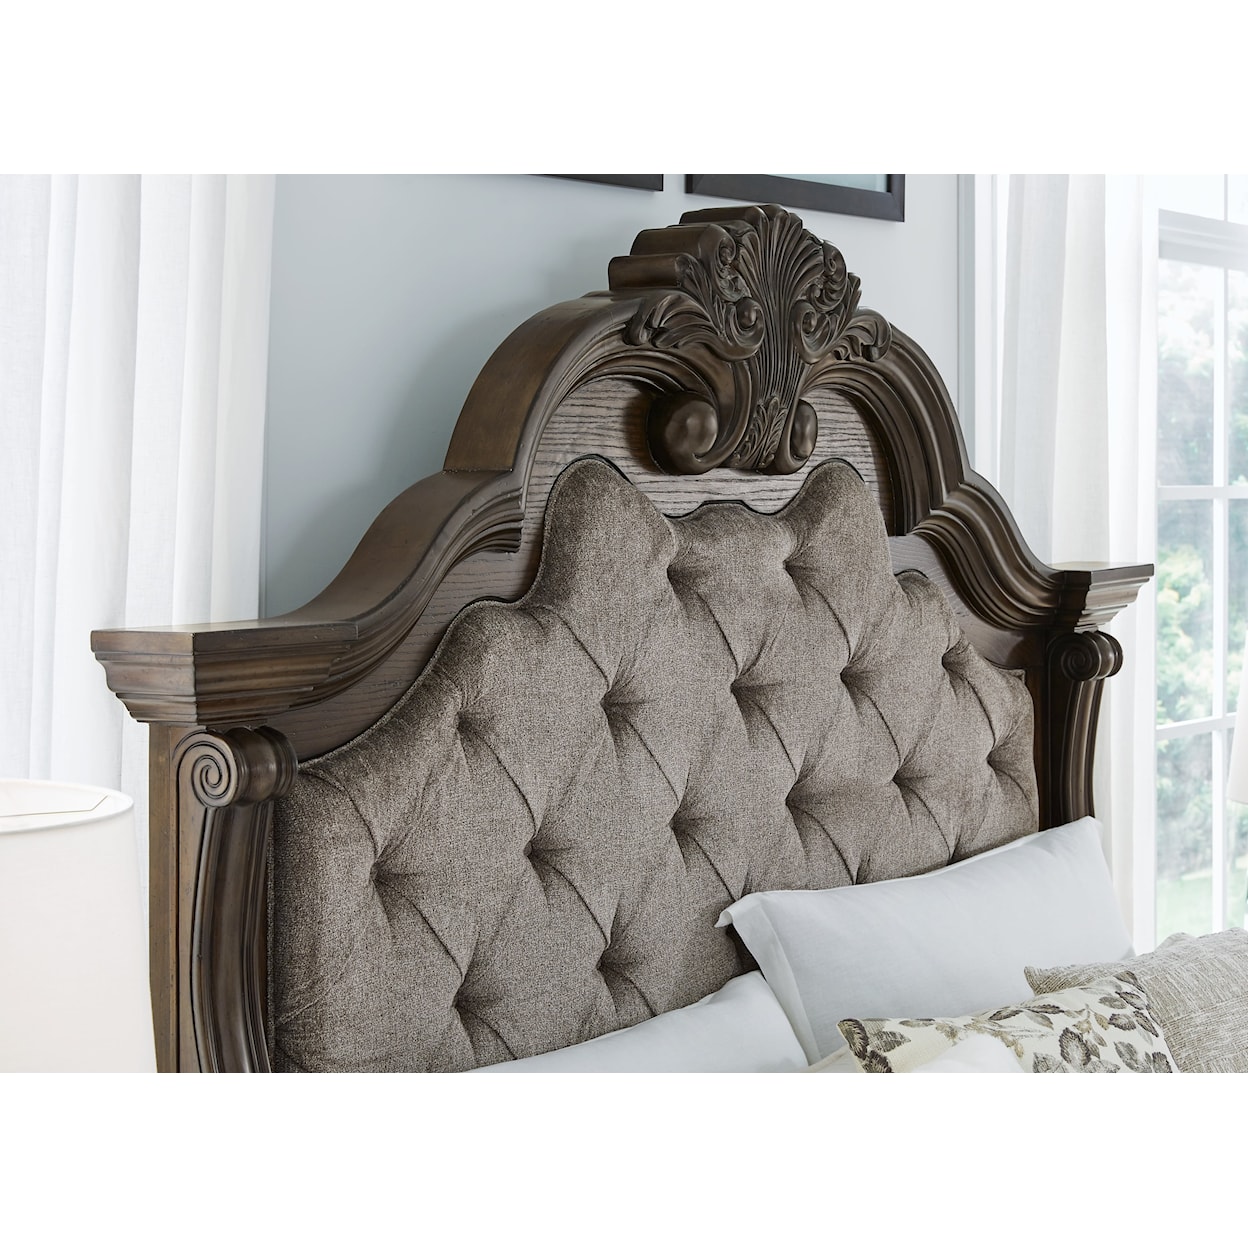 Signature Design by Ashley Maylee Queen Upholstered Bed